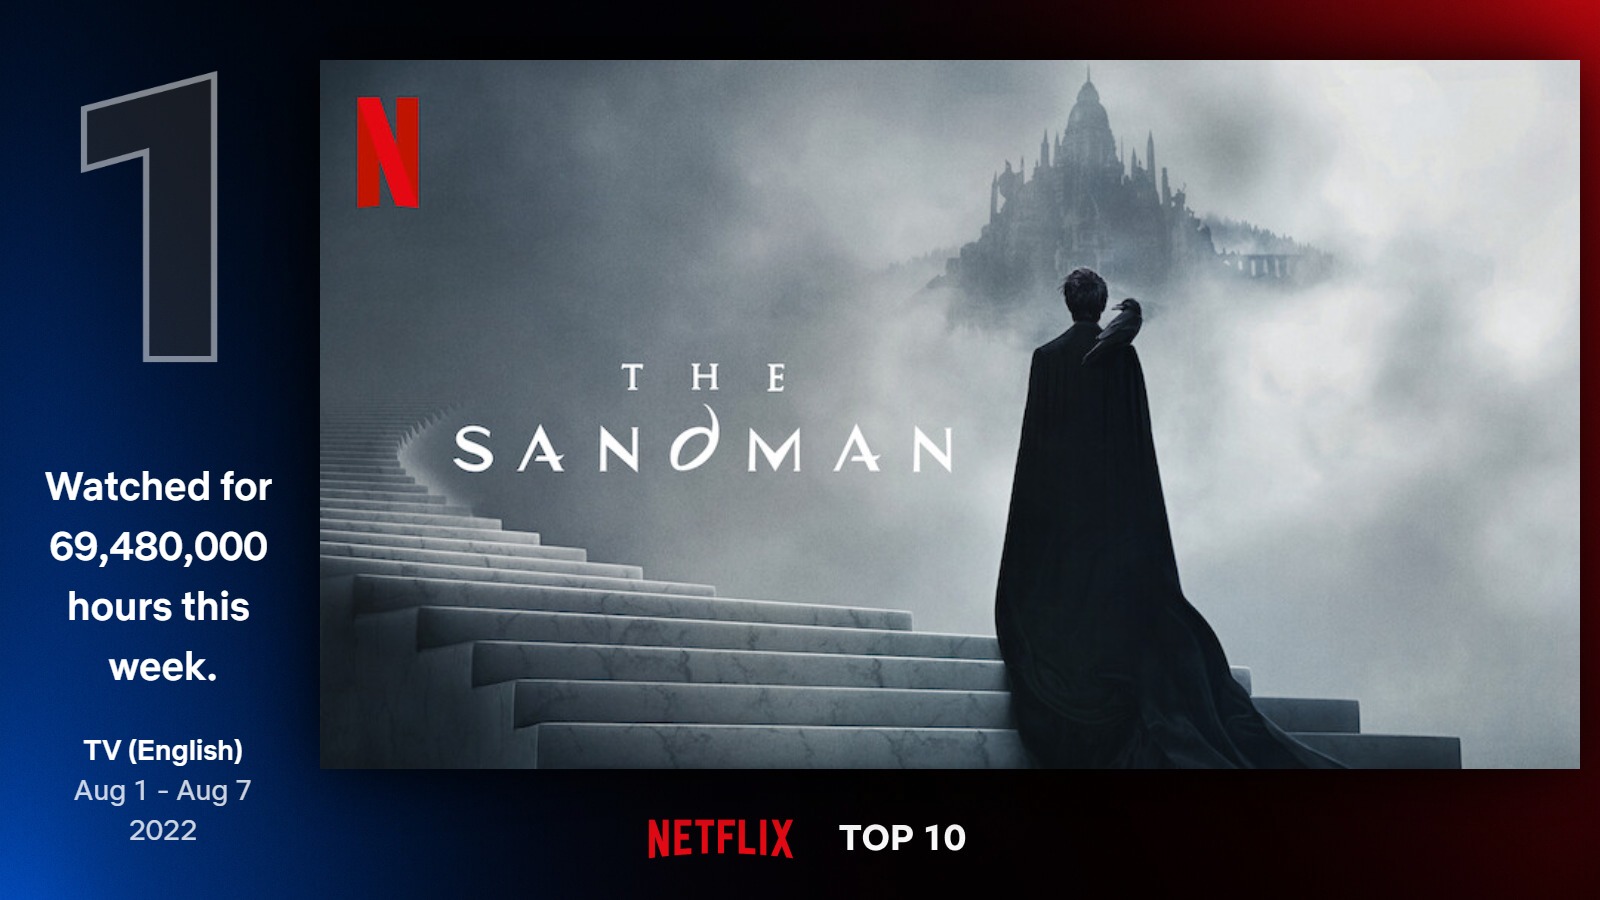 Graphic showing The Sandman as premiering on Netflix in the first week of August 2022.